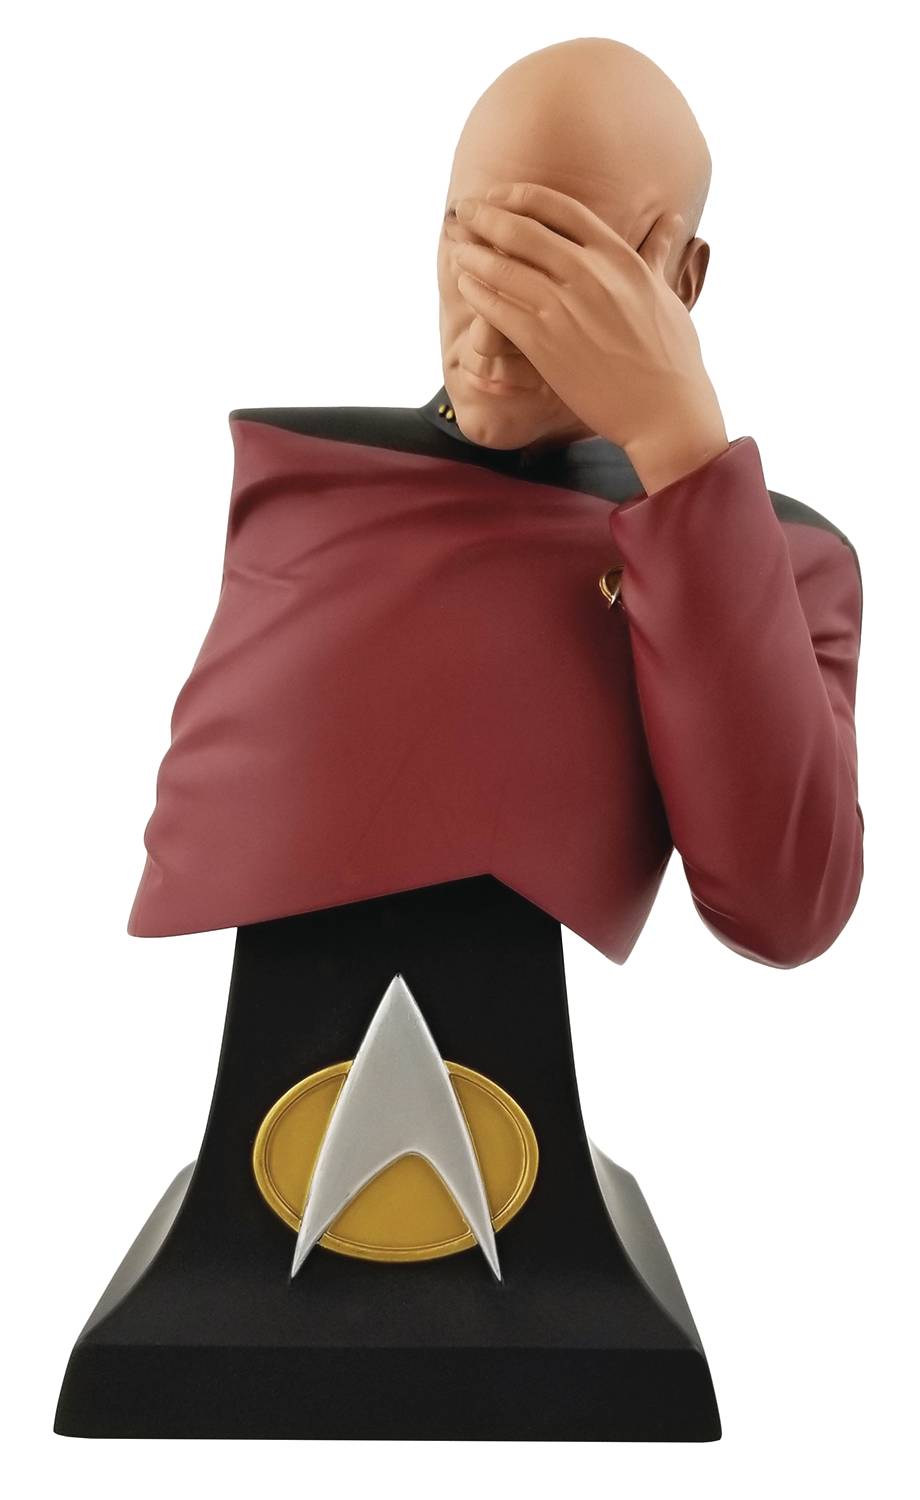 STAR TREK PICARD FACE PALM BUST SDCC 2020 EXCLUSIVE STEWART TV SHOW FREE SHIP 